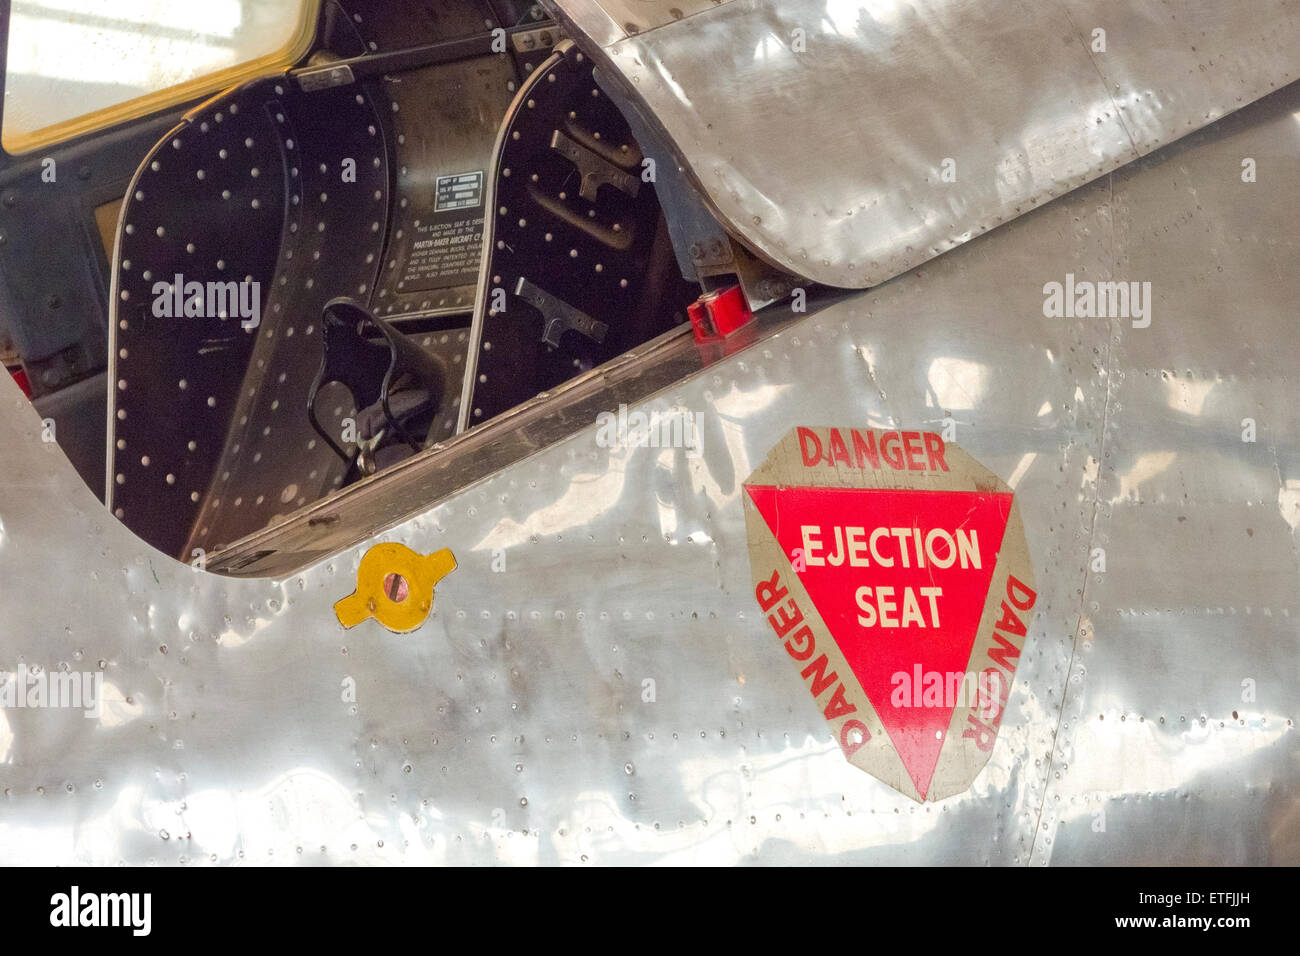 Cockpit and Ejector Seat of a Bristol 188 Supersonic Research Aircraft, UK Stock Photo